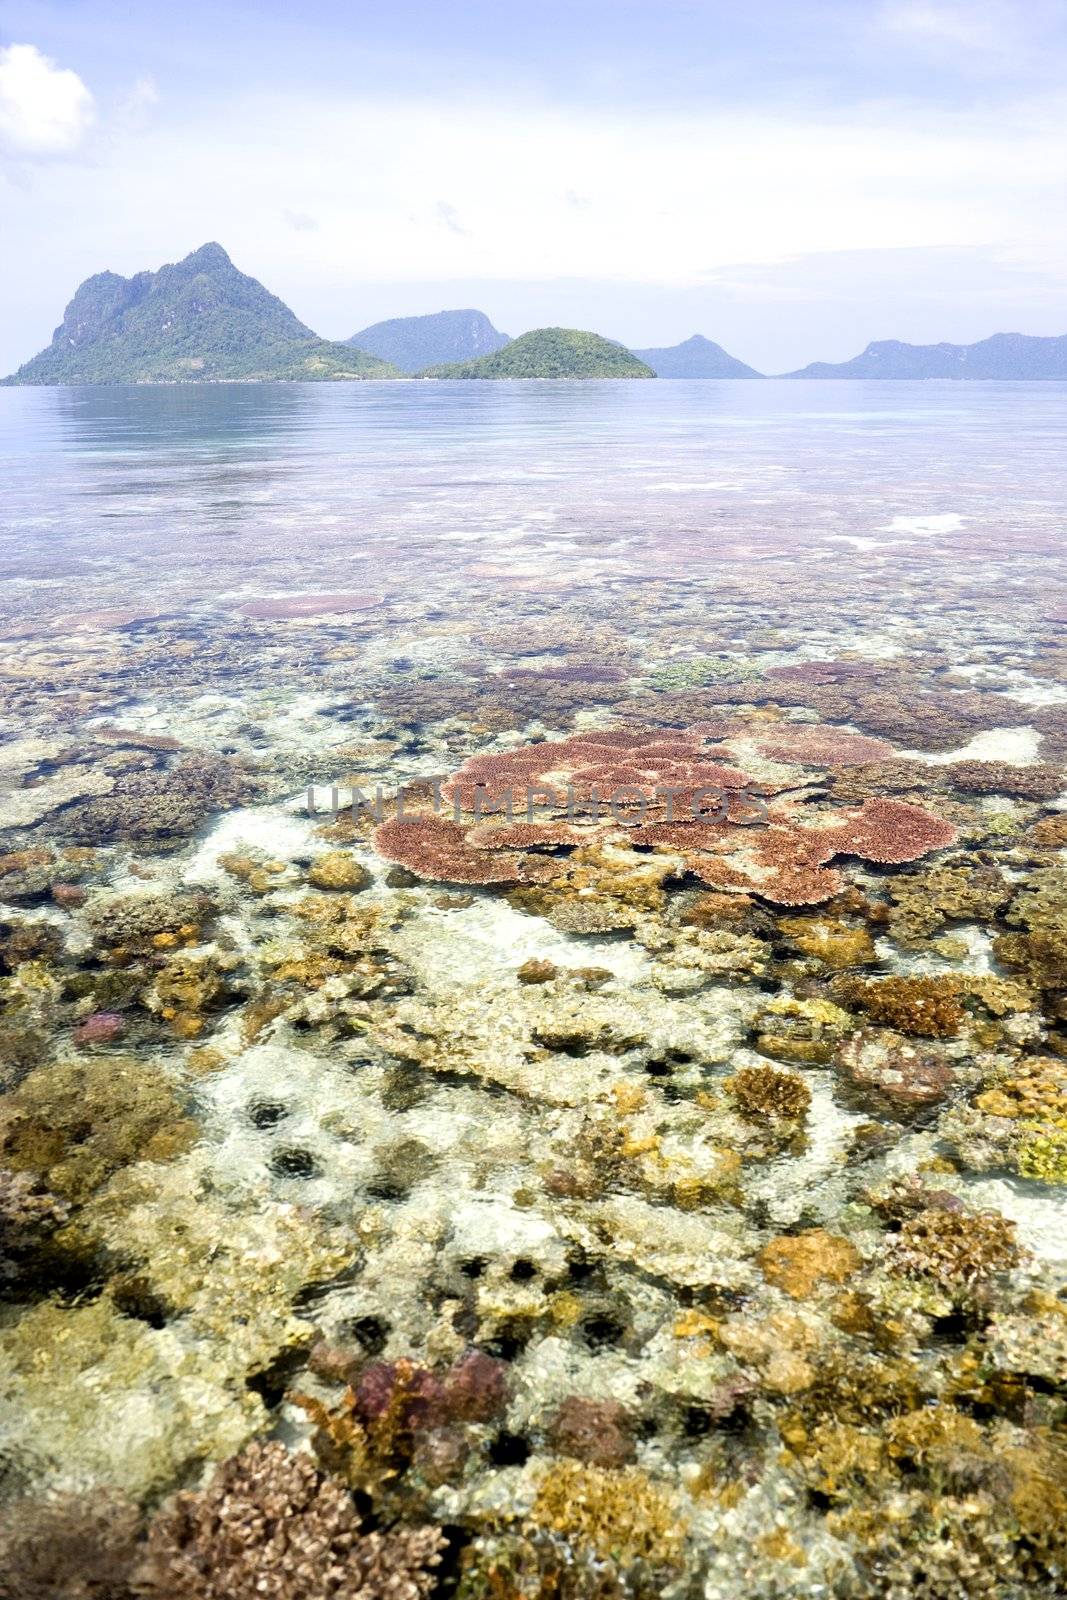 Image of remote Malaysian tropical islands with deep blue skies, crystal clear waters and a coral reef in the foreground.